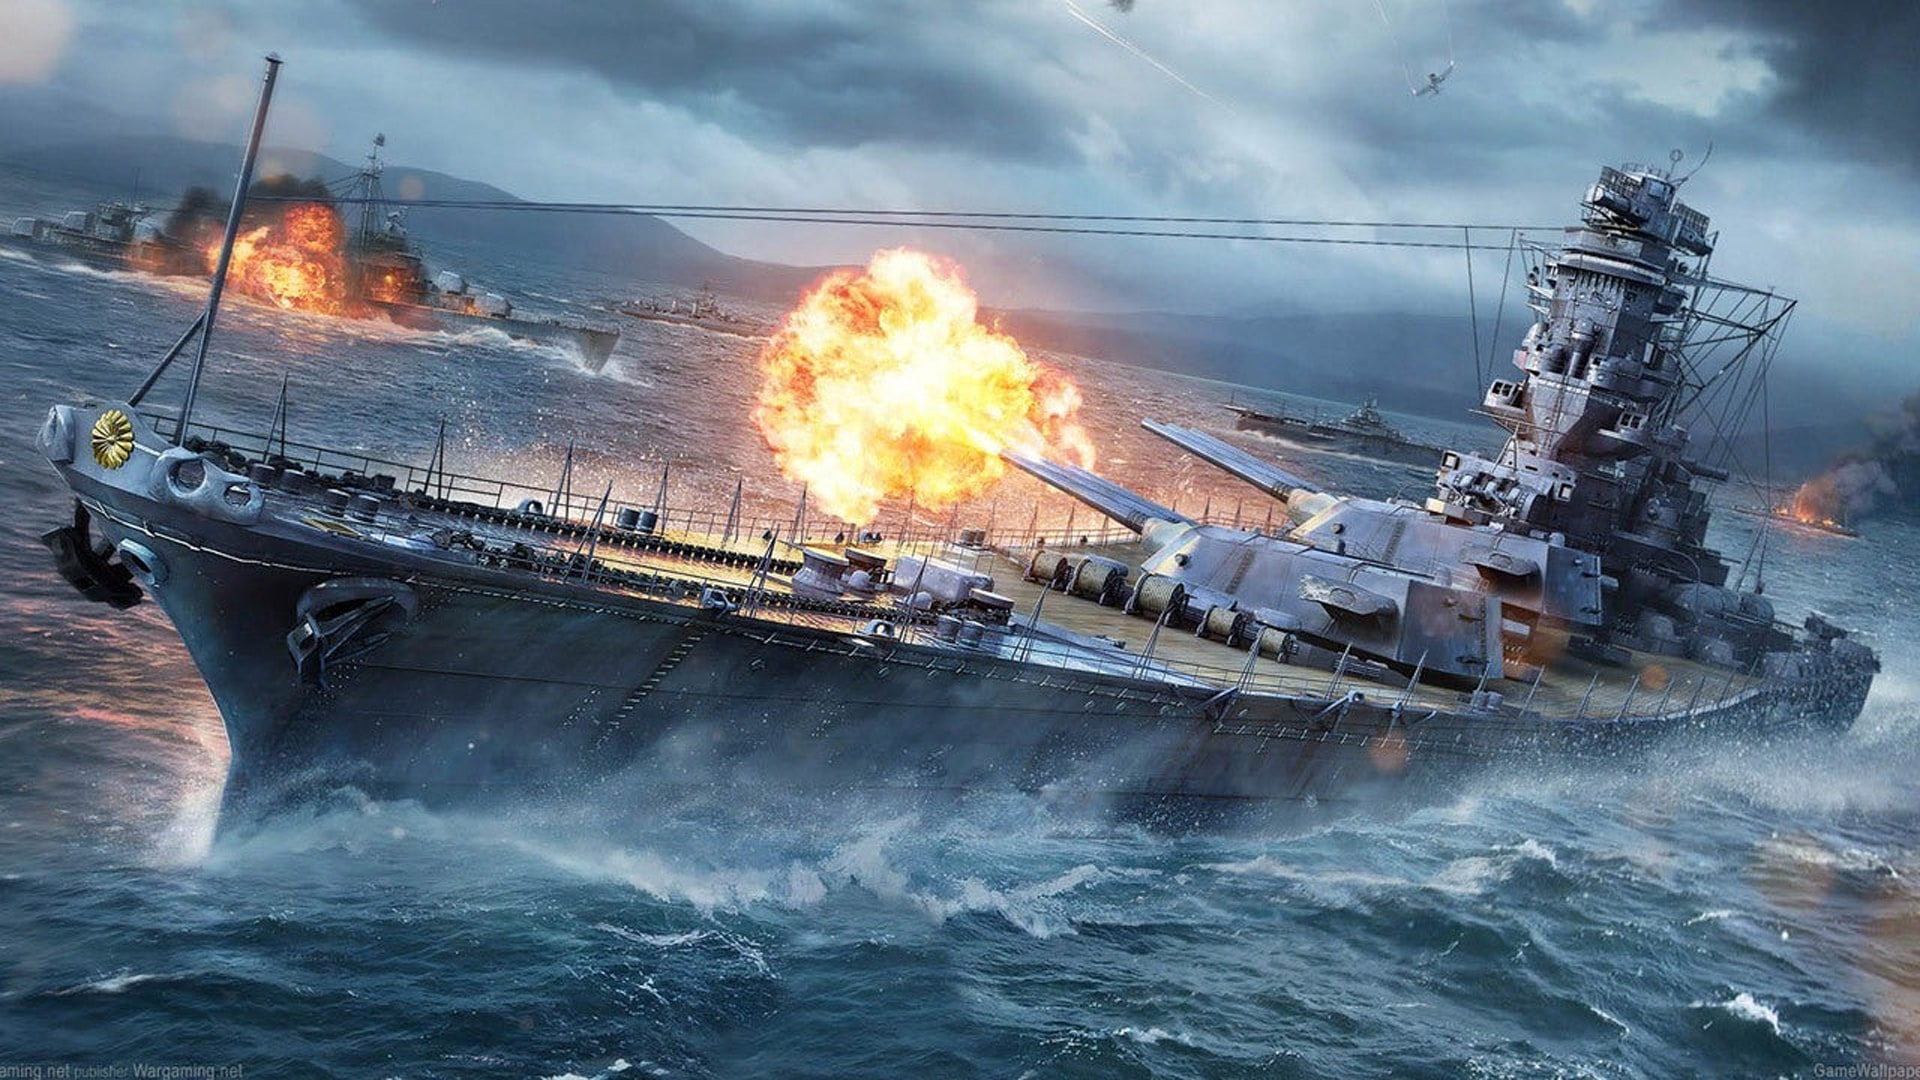 Detailed naval battle scene from World of Warships, showcasing ships and oceanic strategy